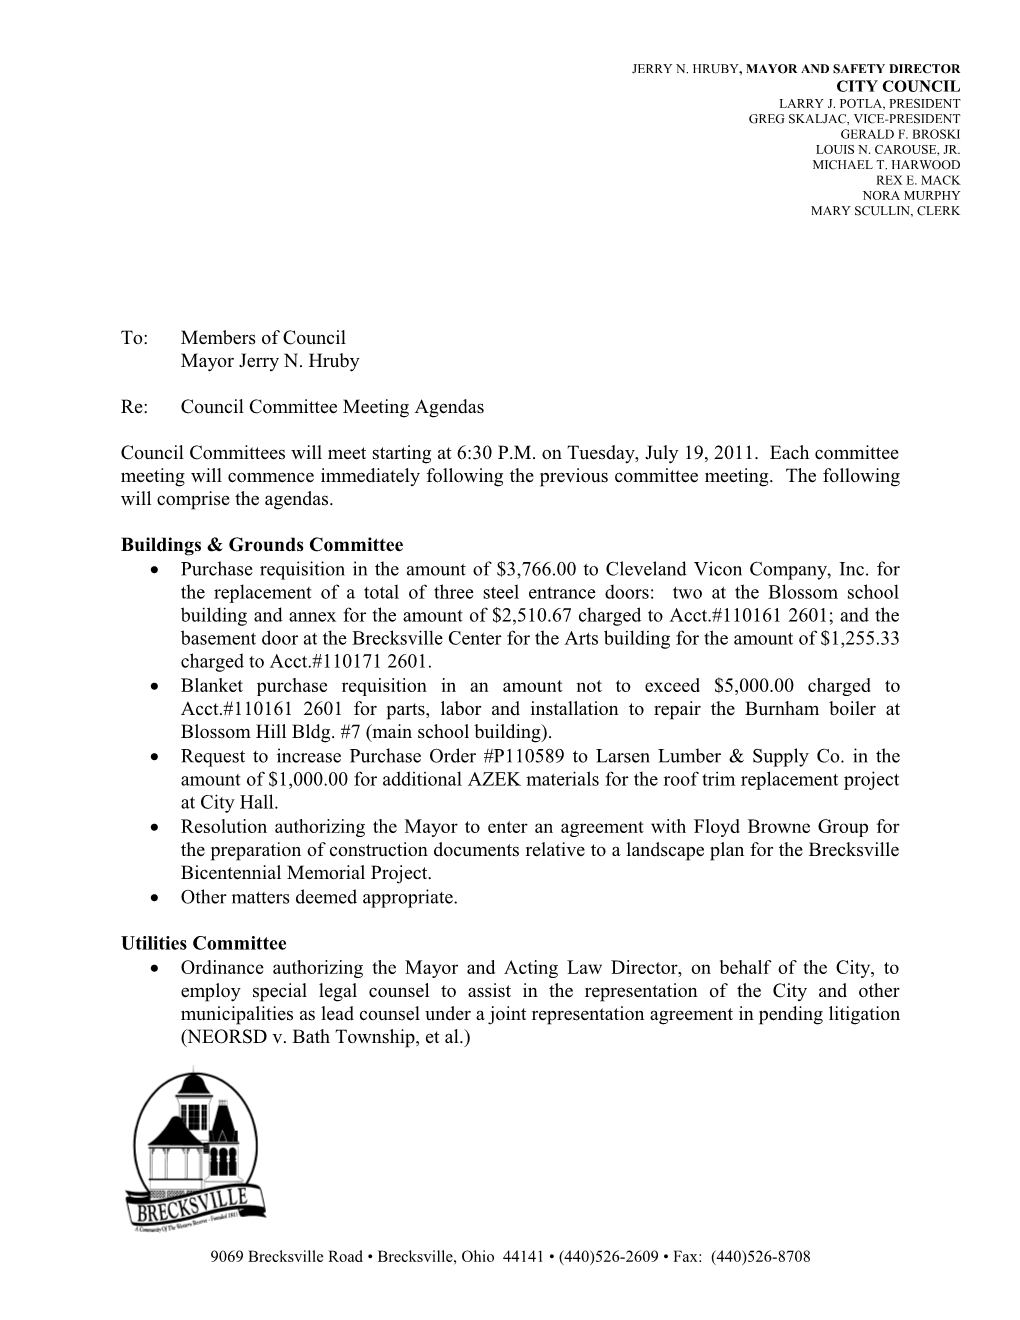 7-19-11 Council Committee Agendas